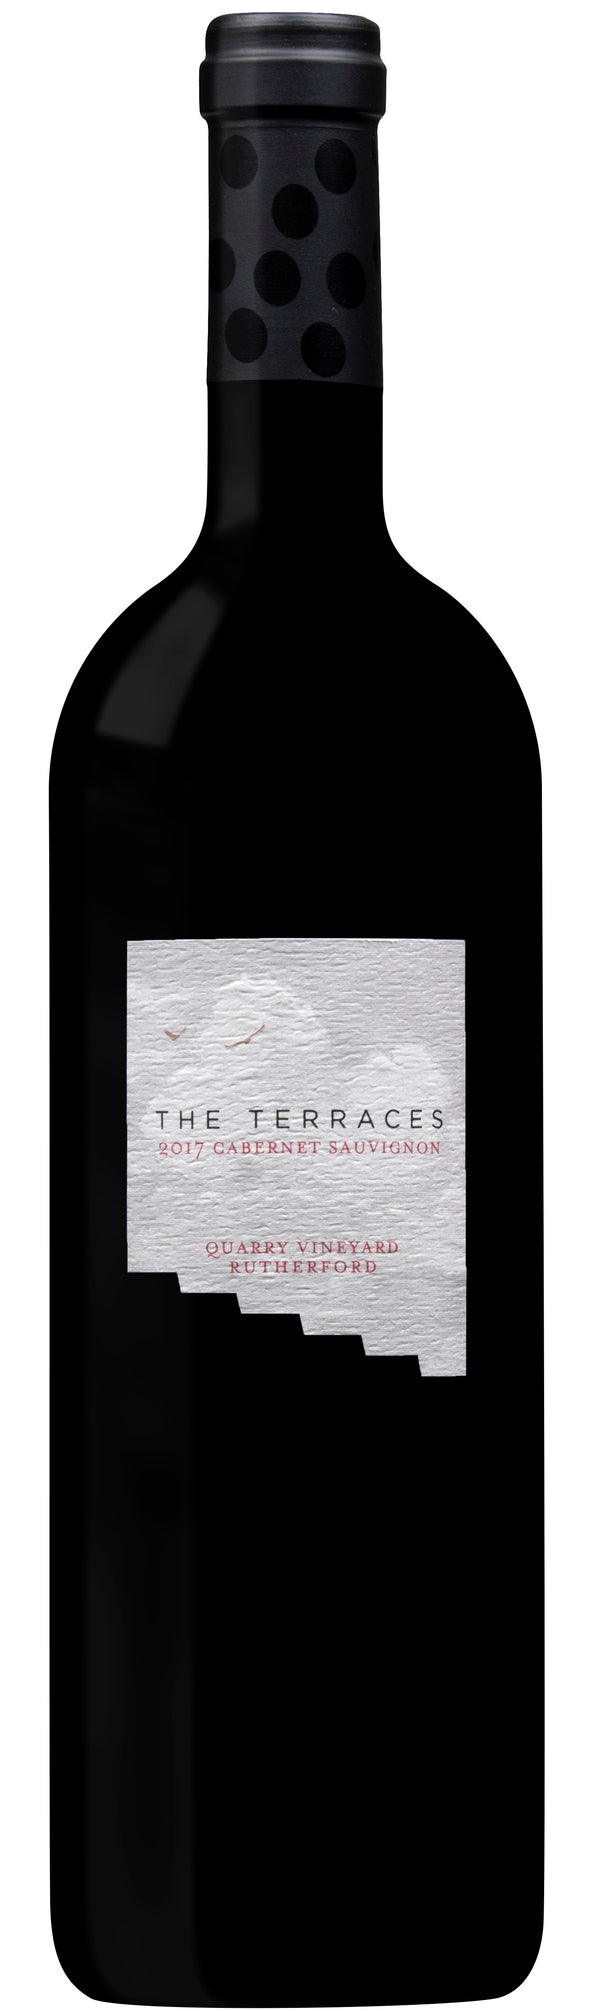 The Terraces Cabernet Sauvignon Rutherford 2017 750ml